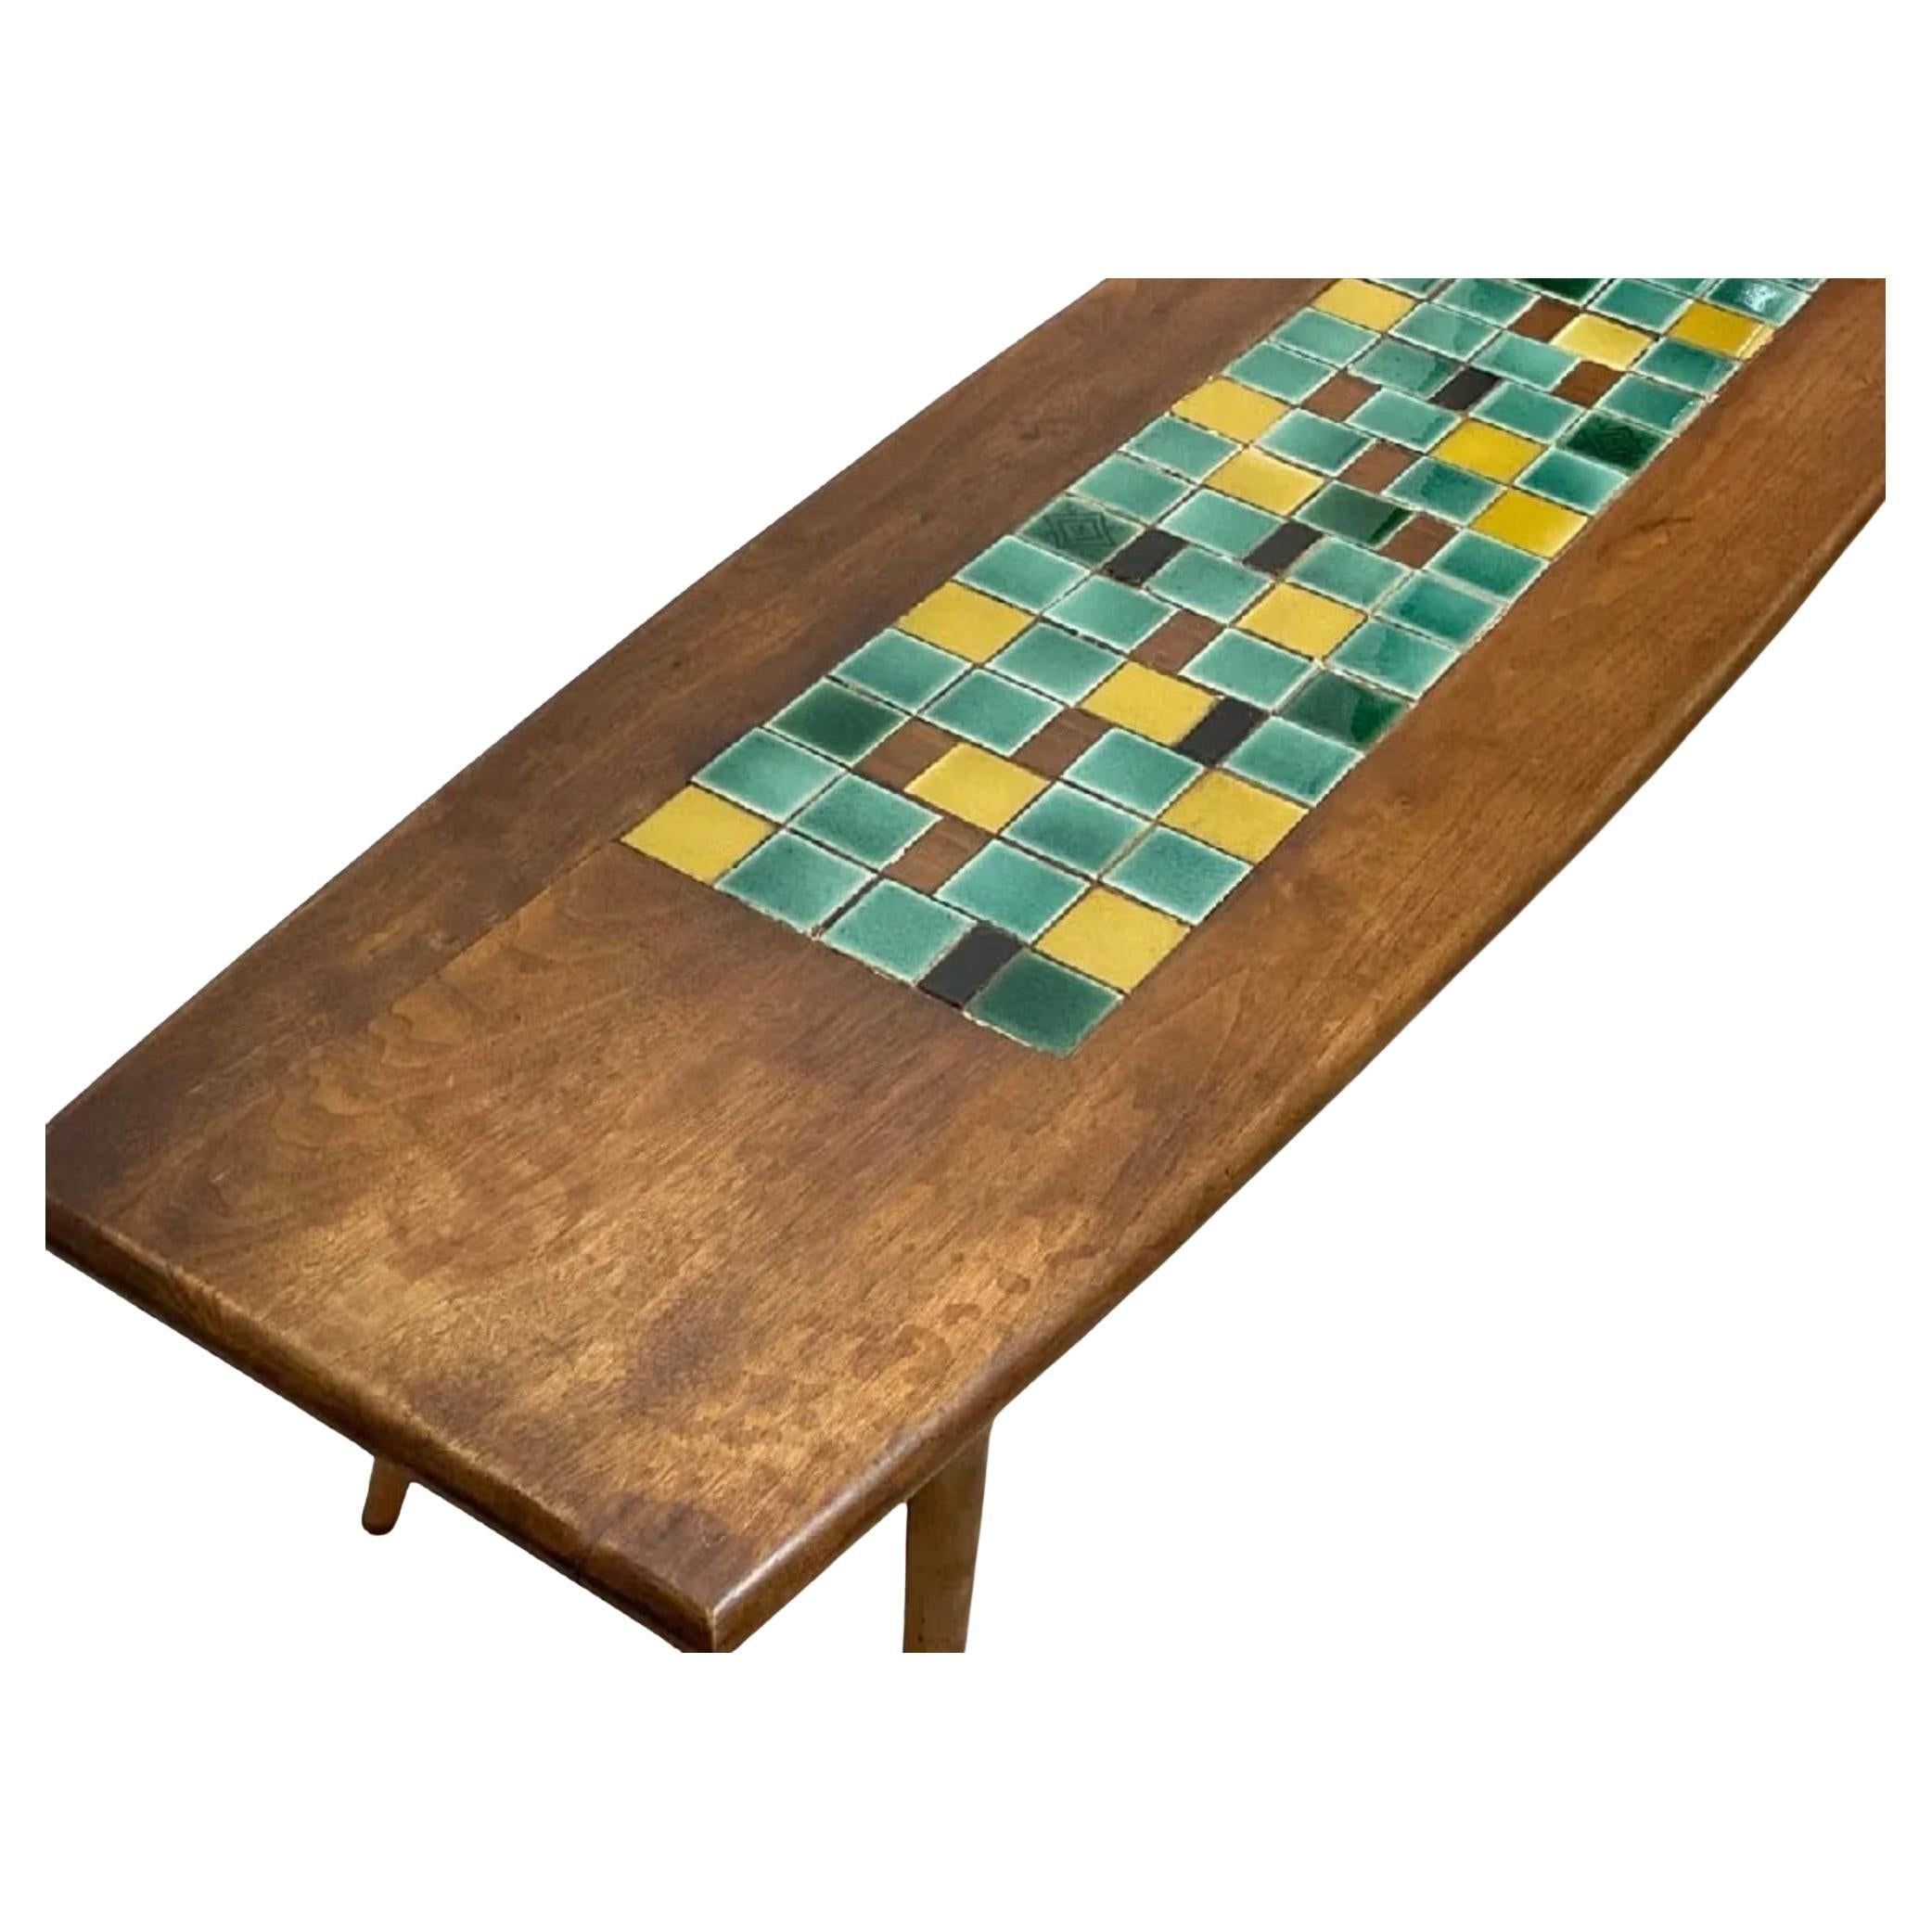 Mid century modern ceramic Tile Top Coffee Table. Yellow, teal, green, and black tiles in walnut wood coffee table. Has lower shelf. Made circa 1960 in USA. Located in Brooklyn NYC. Good vintage condition.

Dimensions: 15” x 72” x 17”